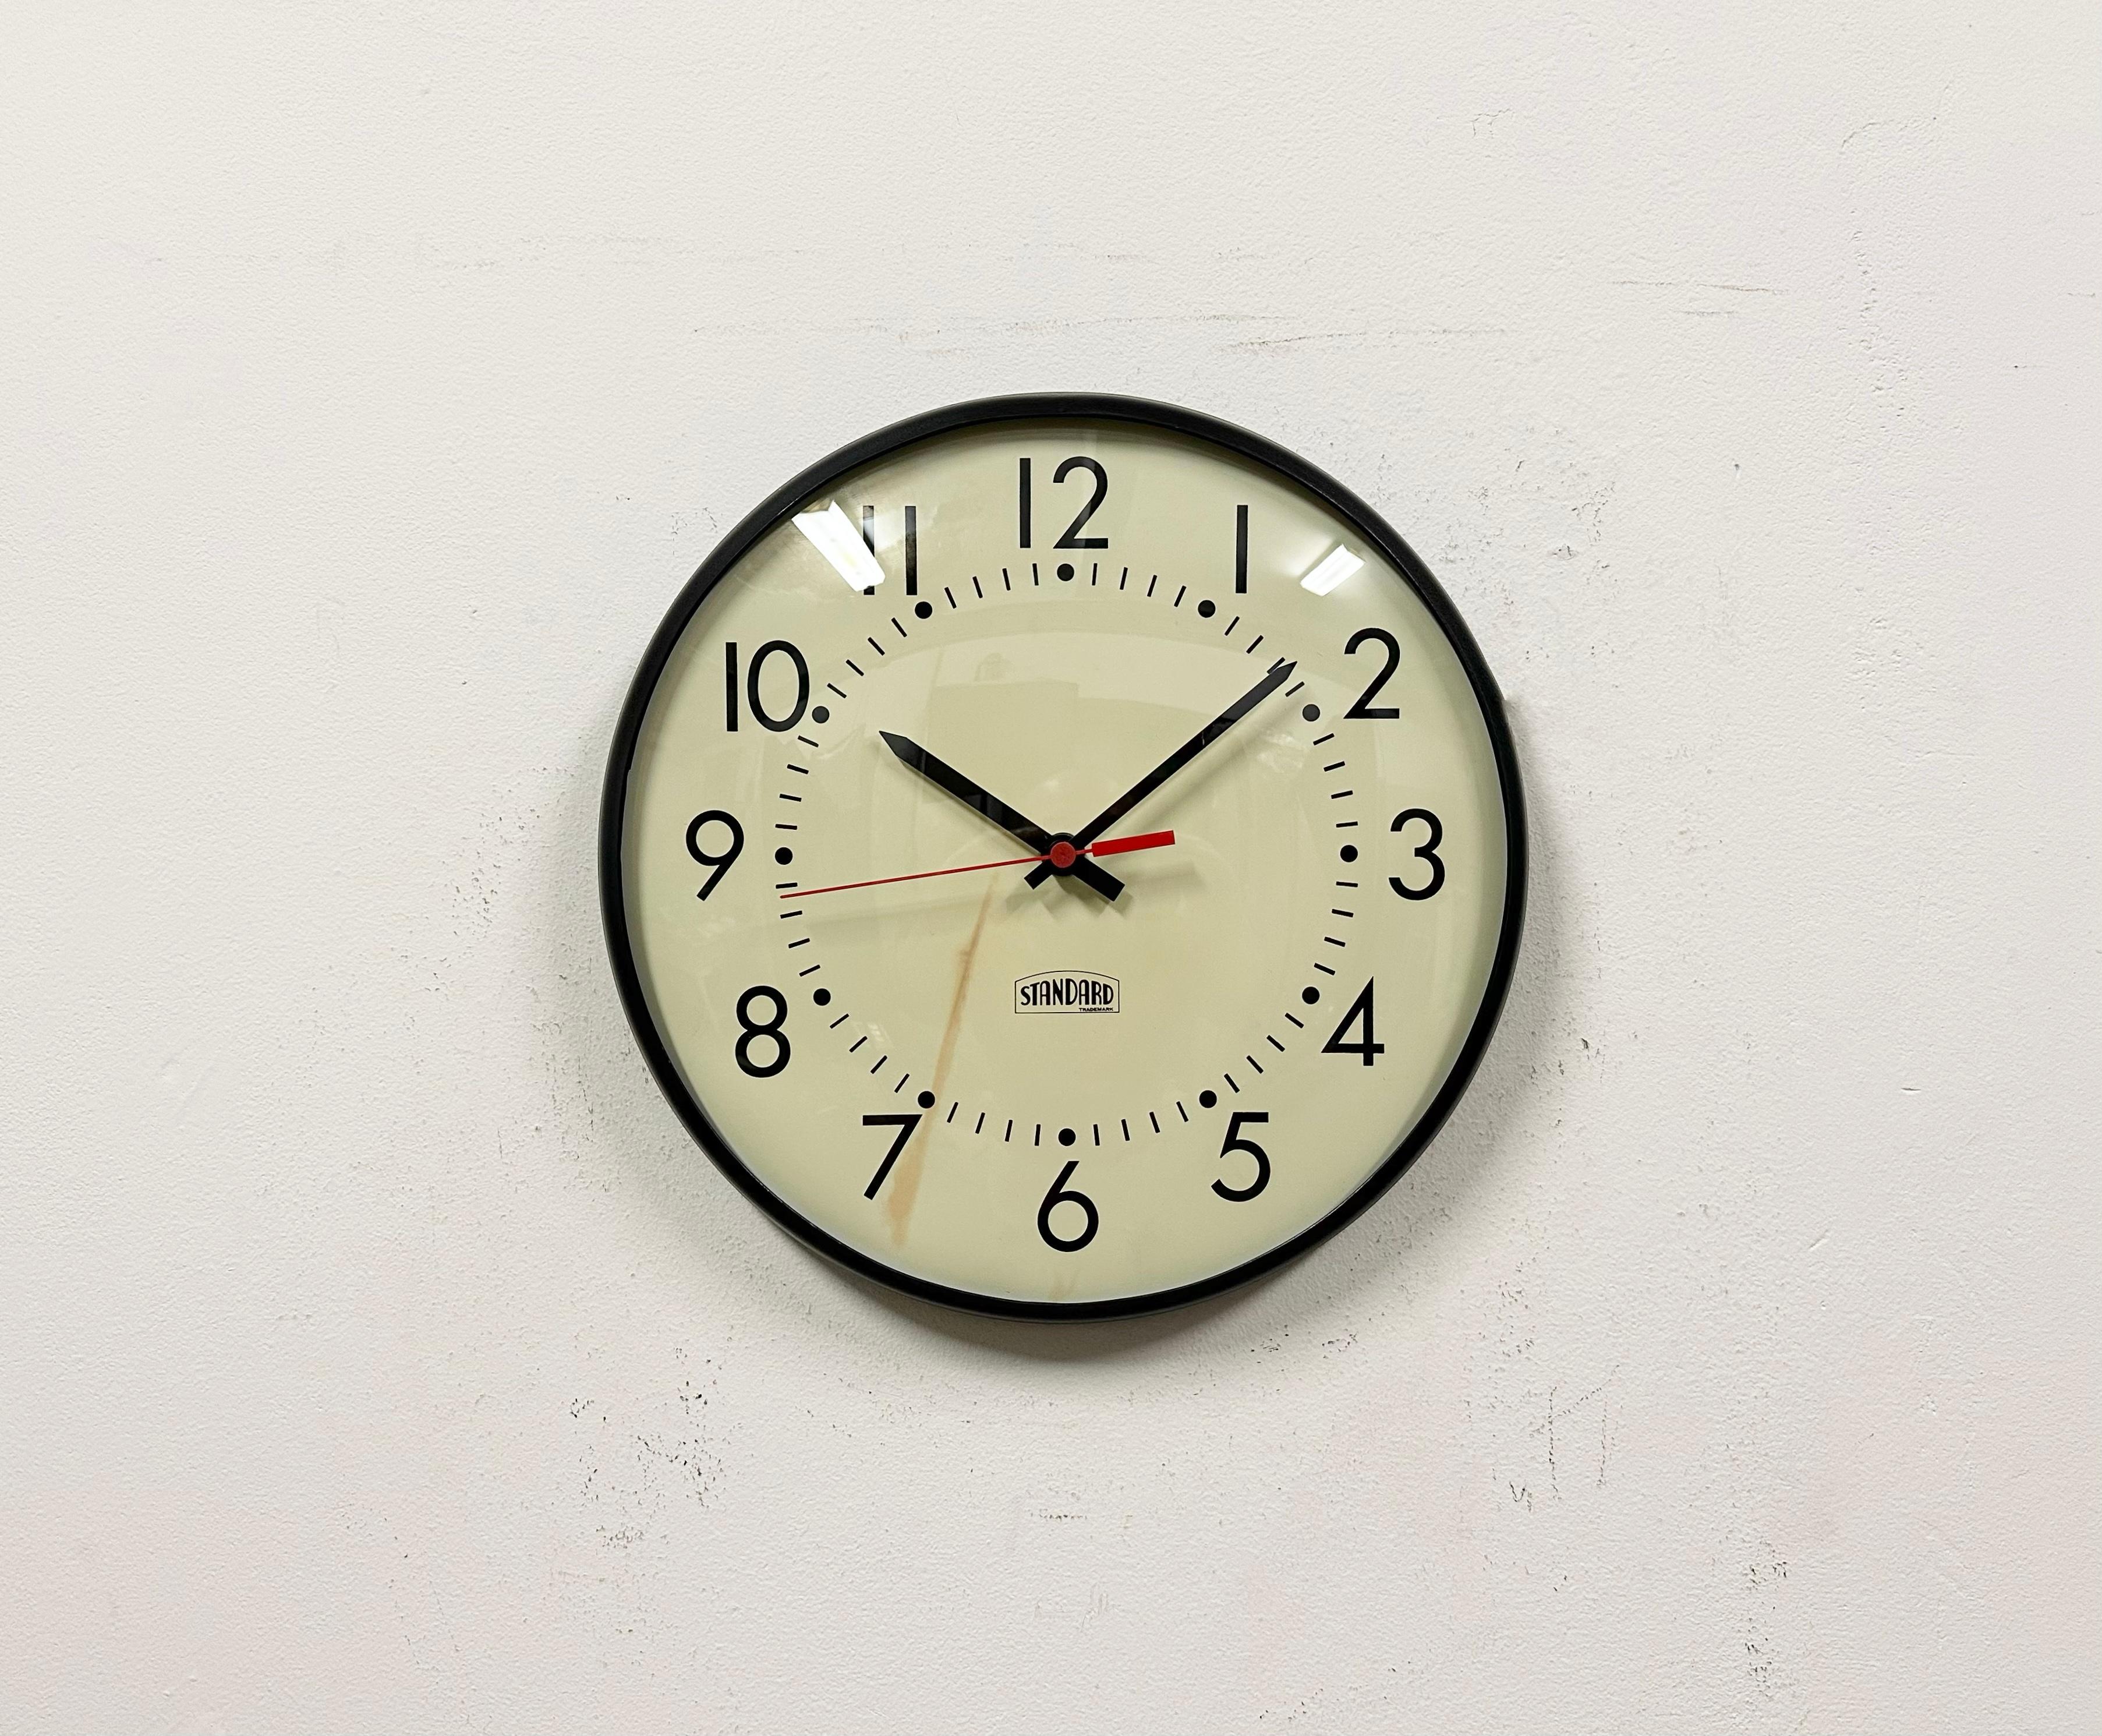 Wall clock made by Standard Electric in U.S.A. during the 1970s-1980s. It features a black iron frame, a metal dial, an aluminium hands and curved clear glass cover. The piece has been converted into a battery-powered clockwork and requires only one